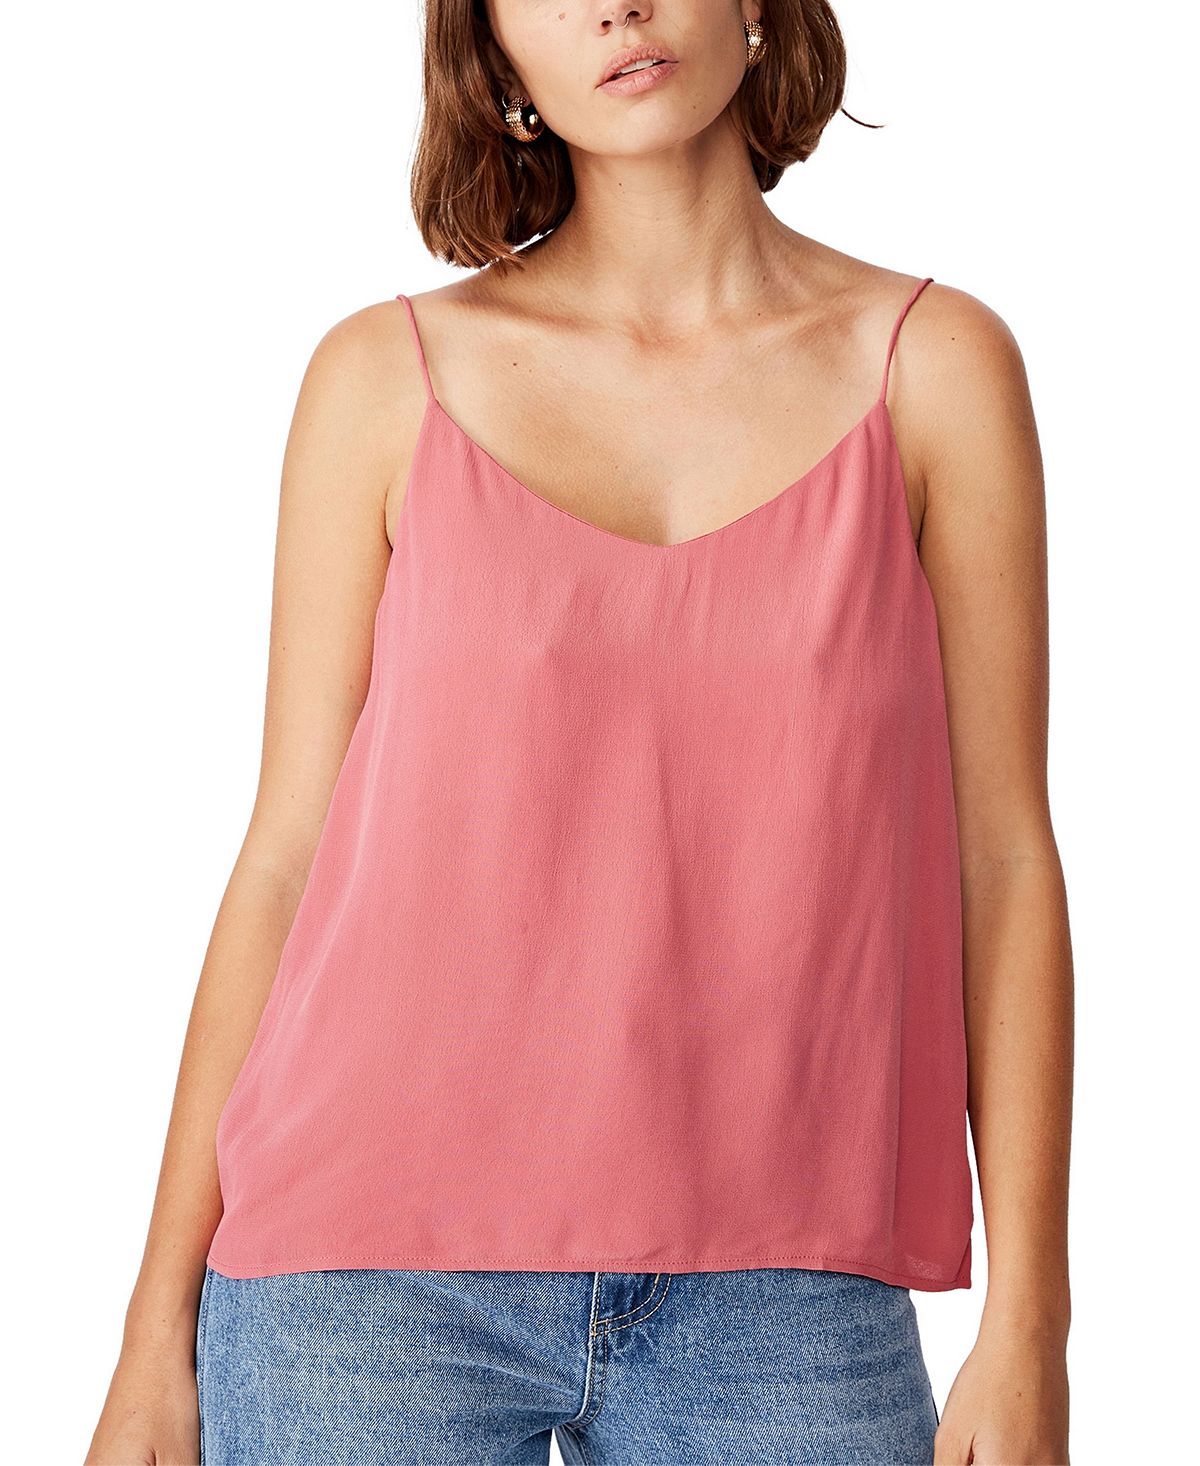 Cotton On Astrid Cami Pink